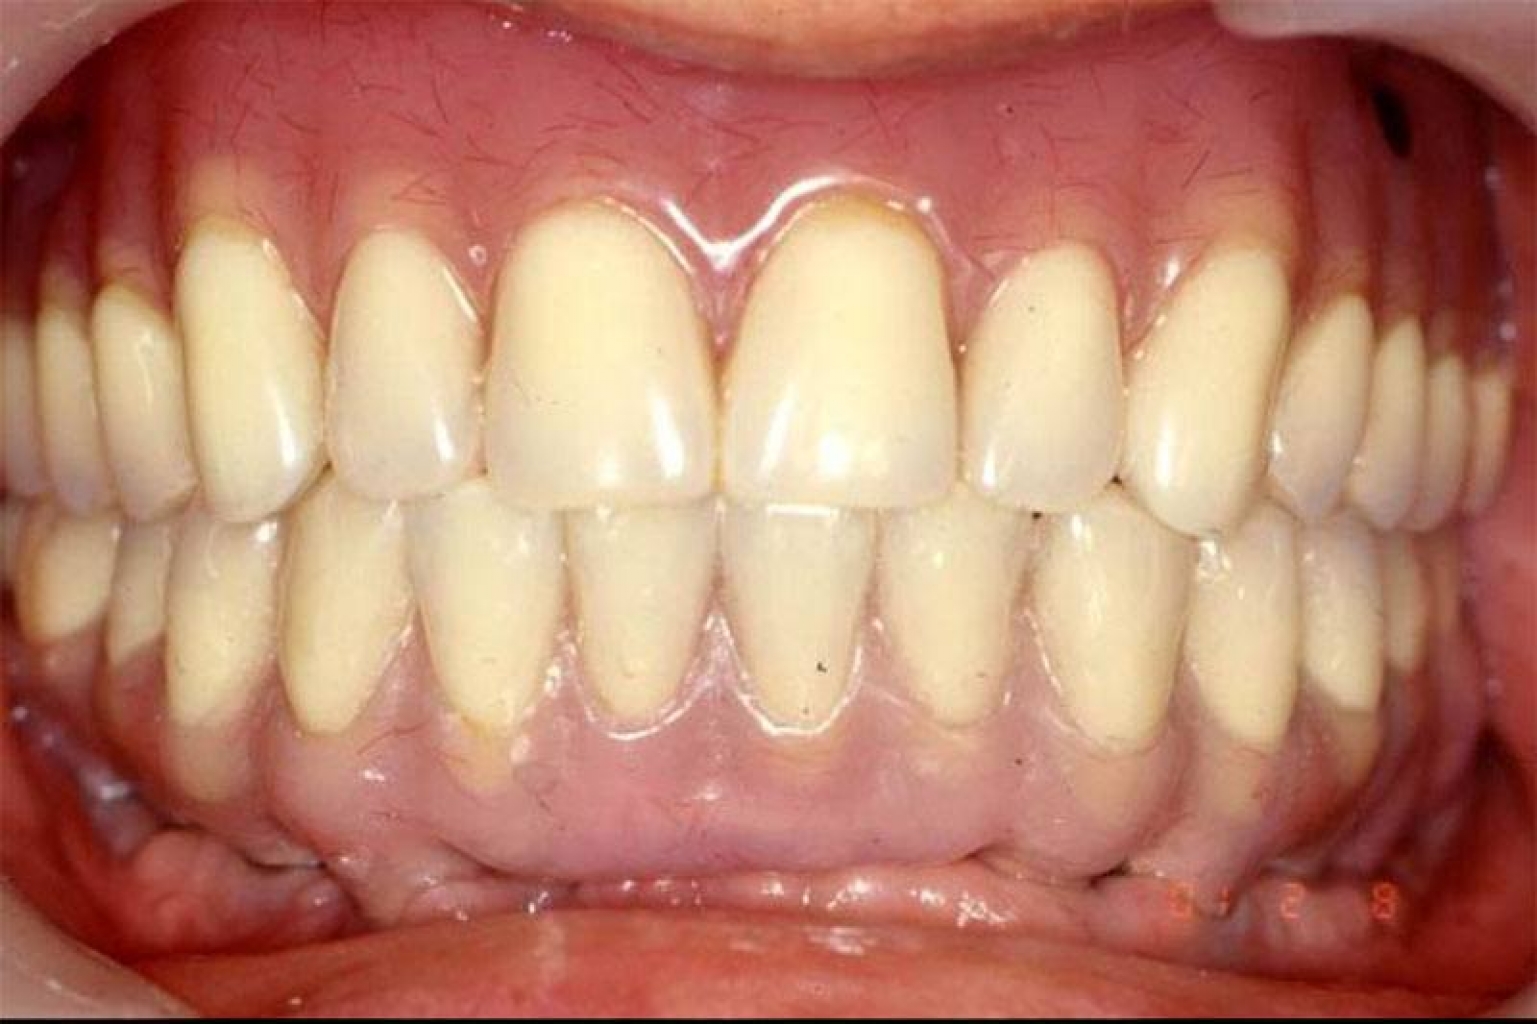 To achieve a picture-perfect smile, Dr. Choi used a fixed bottom hybrid/detachable denture with a metal frame wrapped in acrylic. The patient received a full-mouth restoration with upper implant supported over dentures.